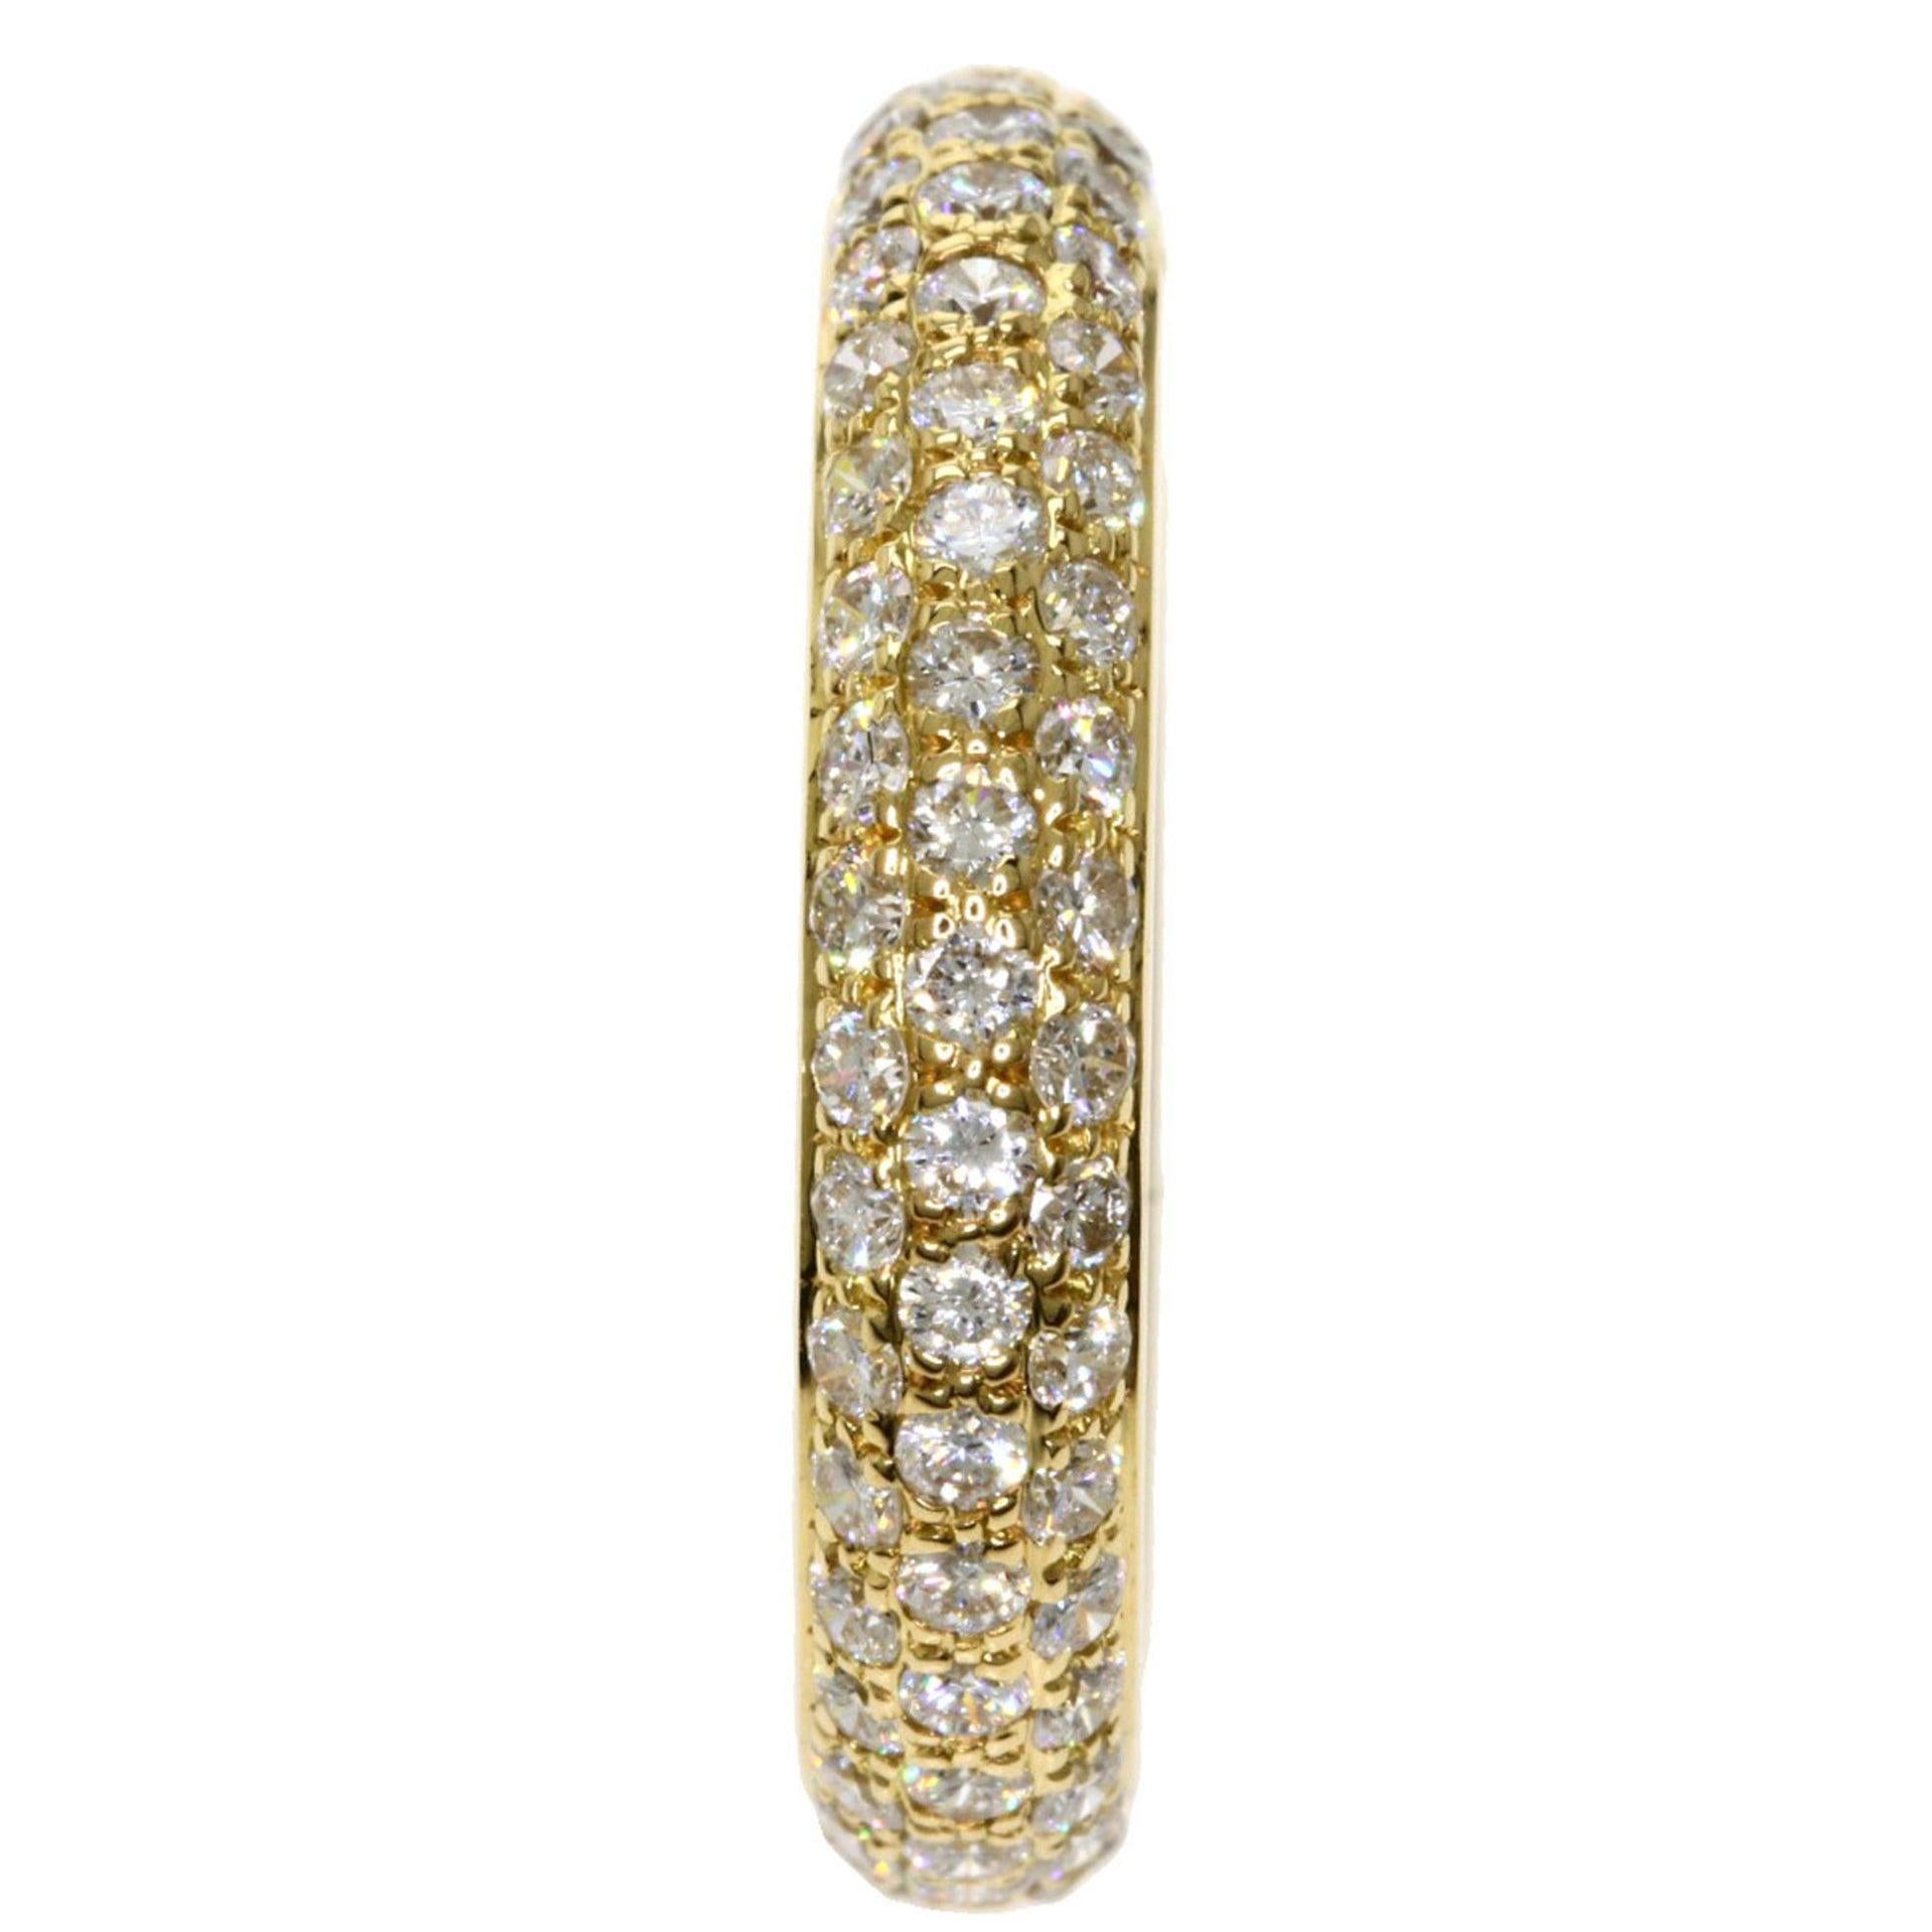 Women's Cartier Pave Eternity Full Diamond Ring in 18K Yellow Gold For Sale